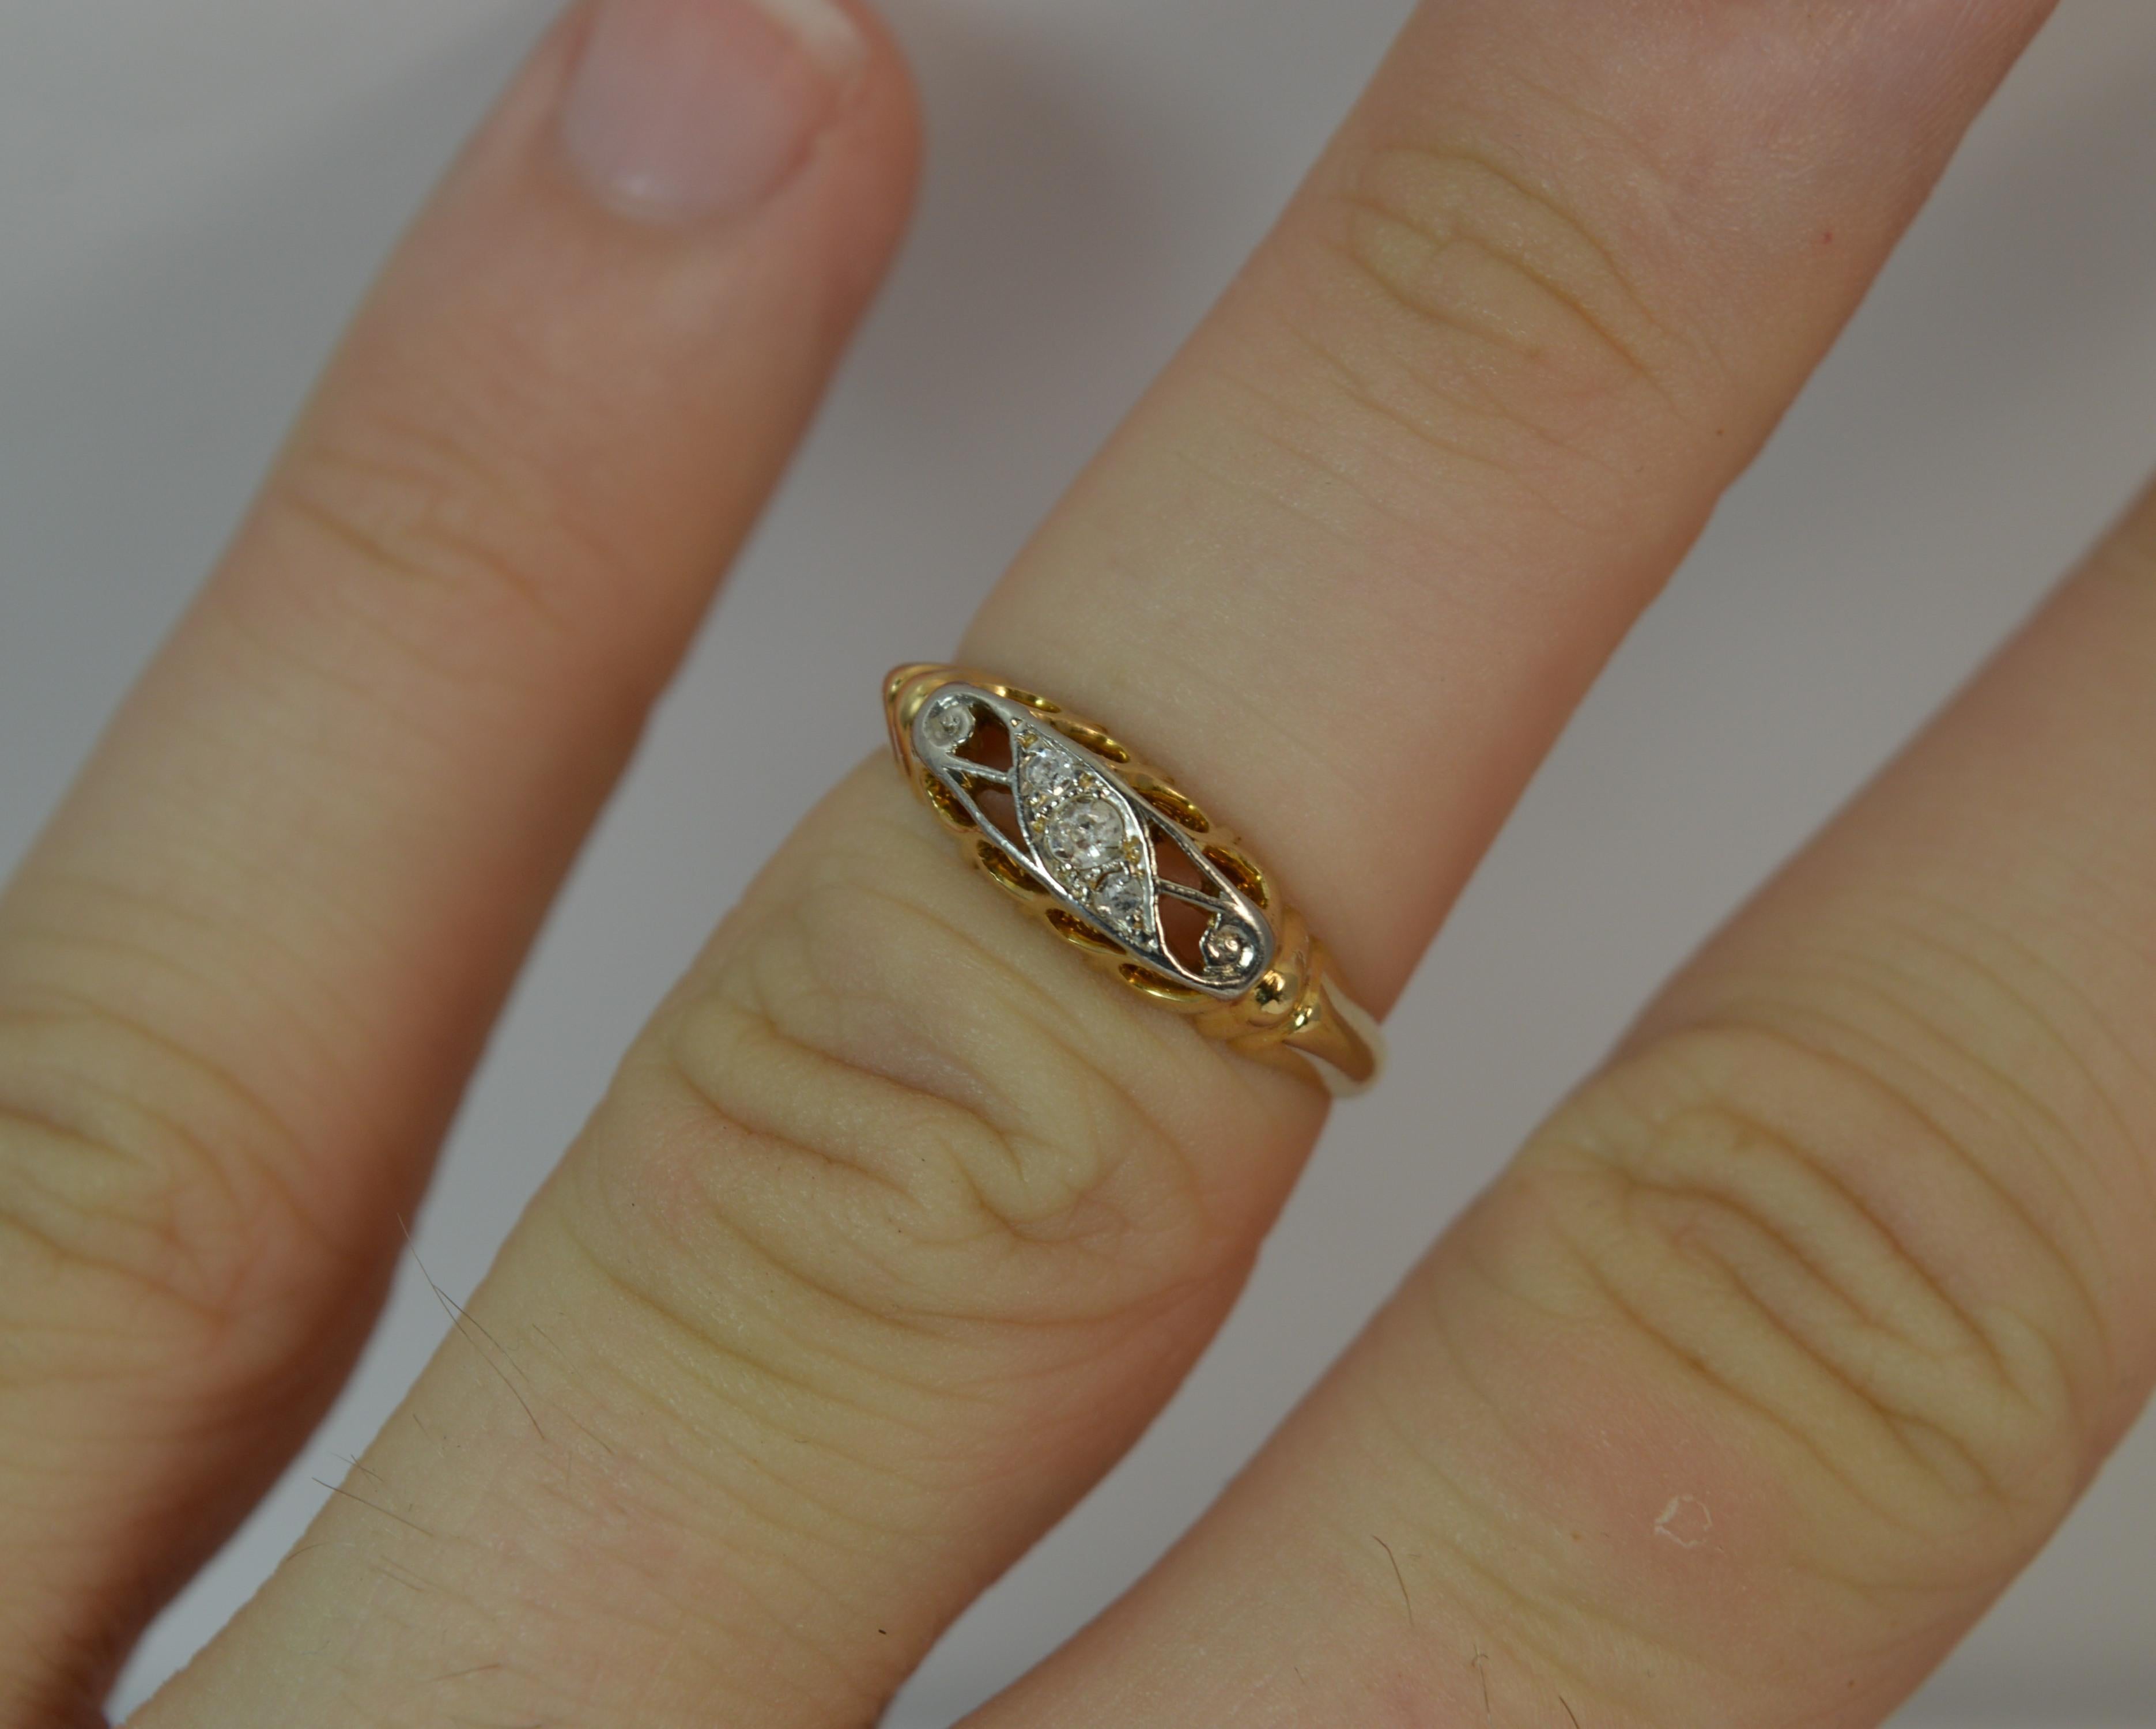 
A gorgeous true antique five diamond boat ring. 18 carat yellow gold example. Set with three old cut diamonds in a palladium setting. Ideal stack ring.

​11.5mm spread of stones, 5mm thick band to front.

Size J UK, 4 3/4 US. 2.3 grams. Very good